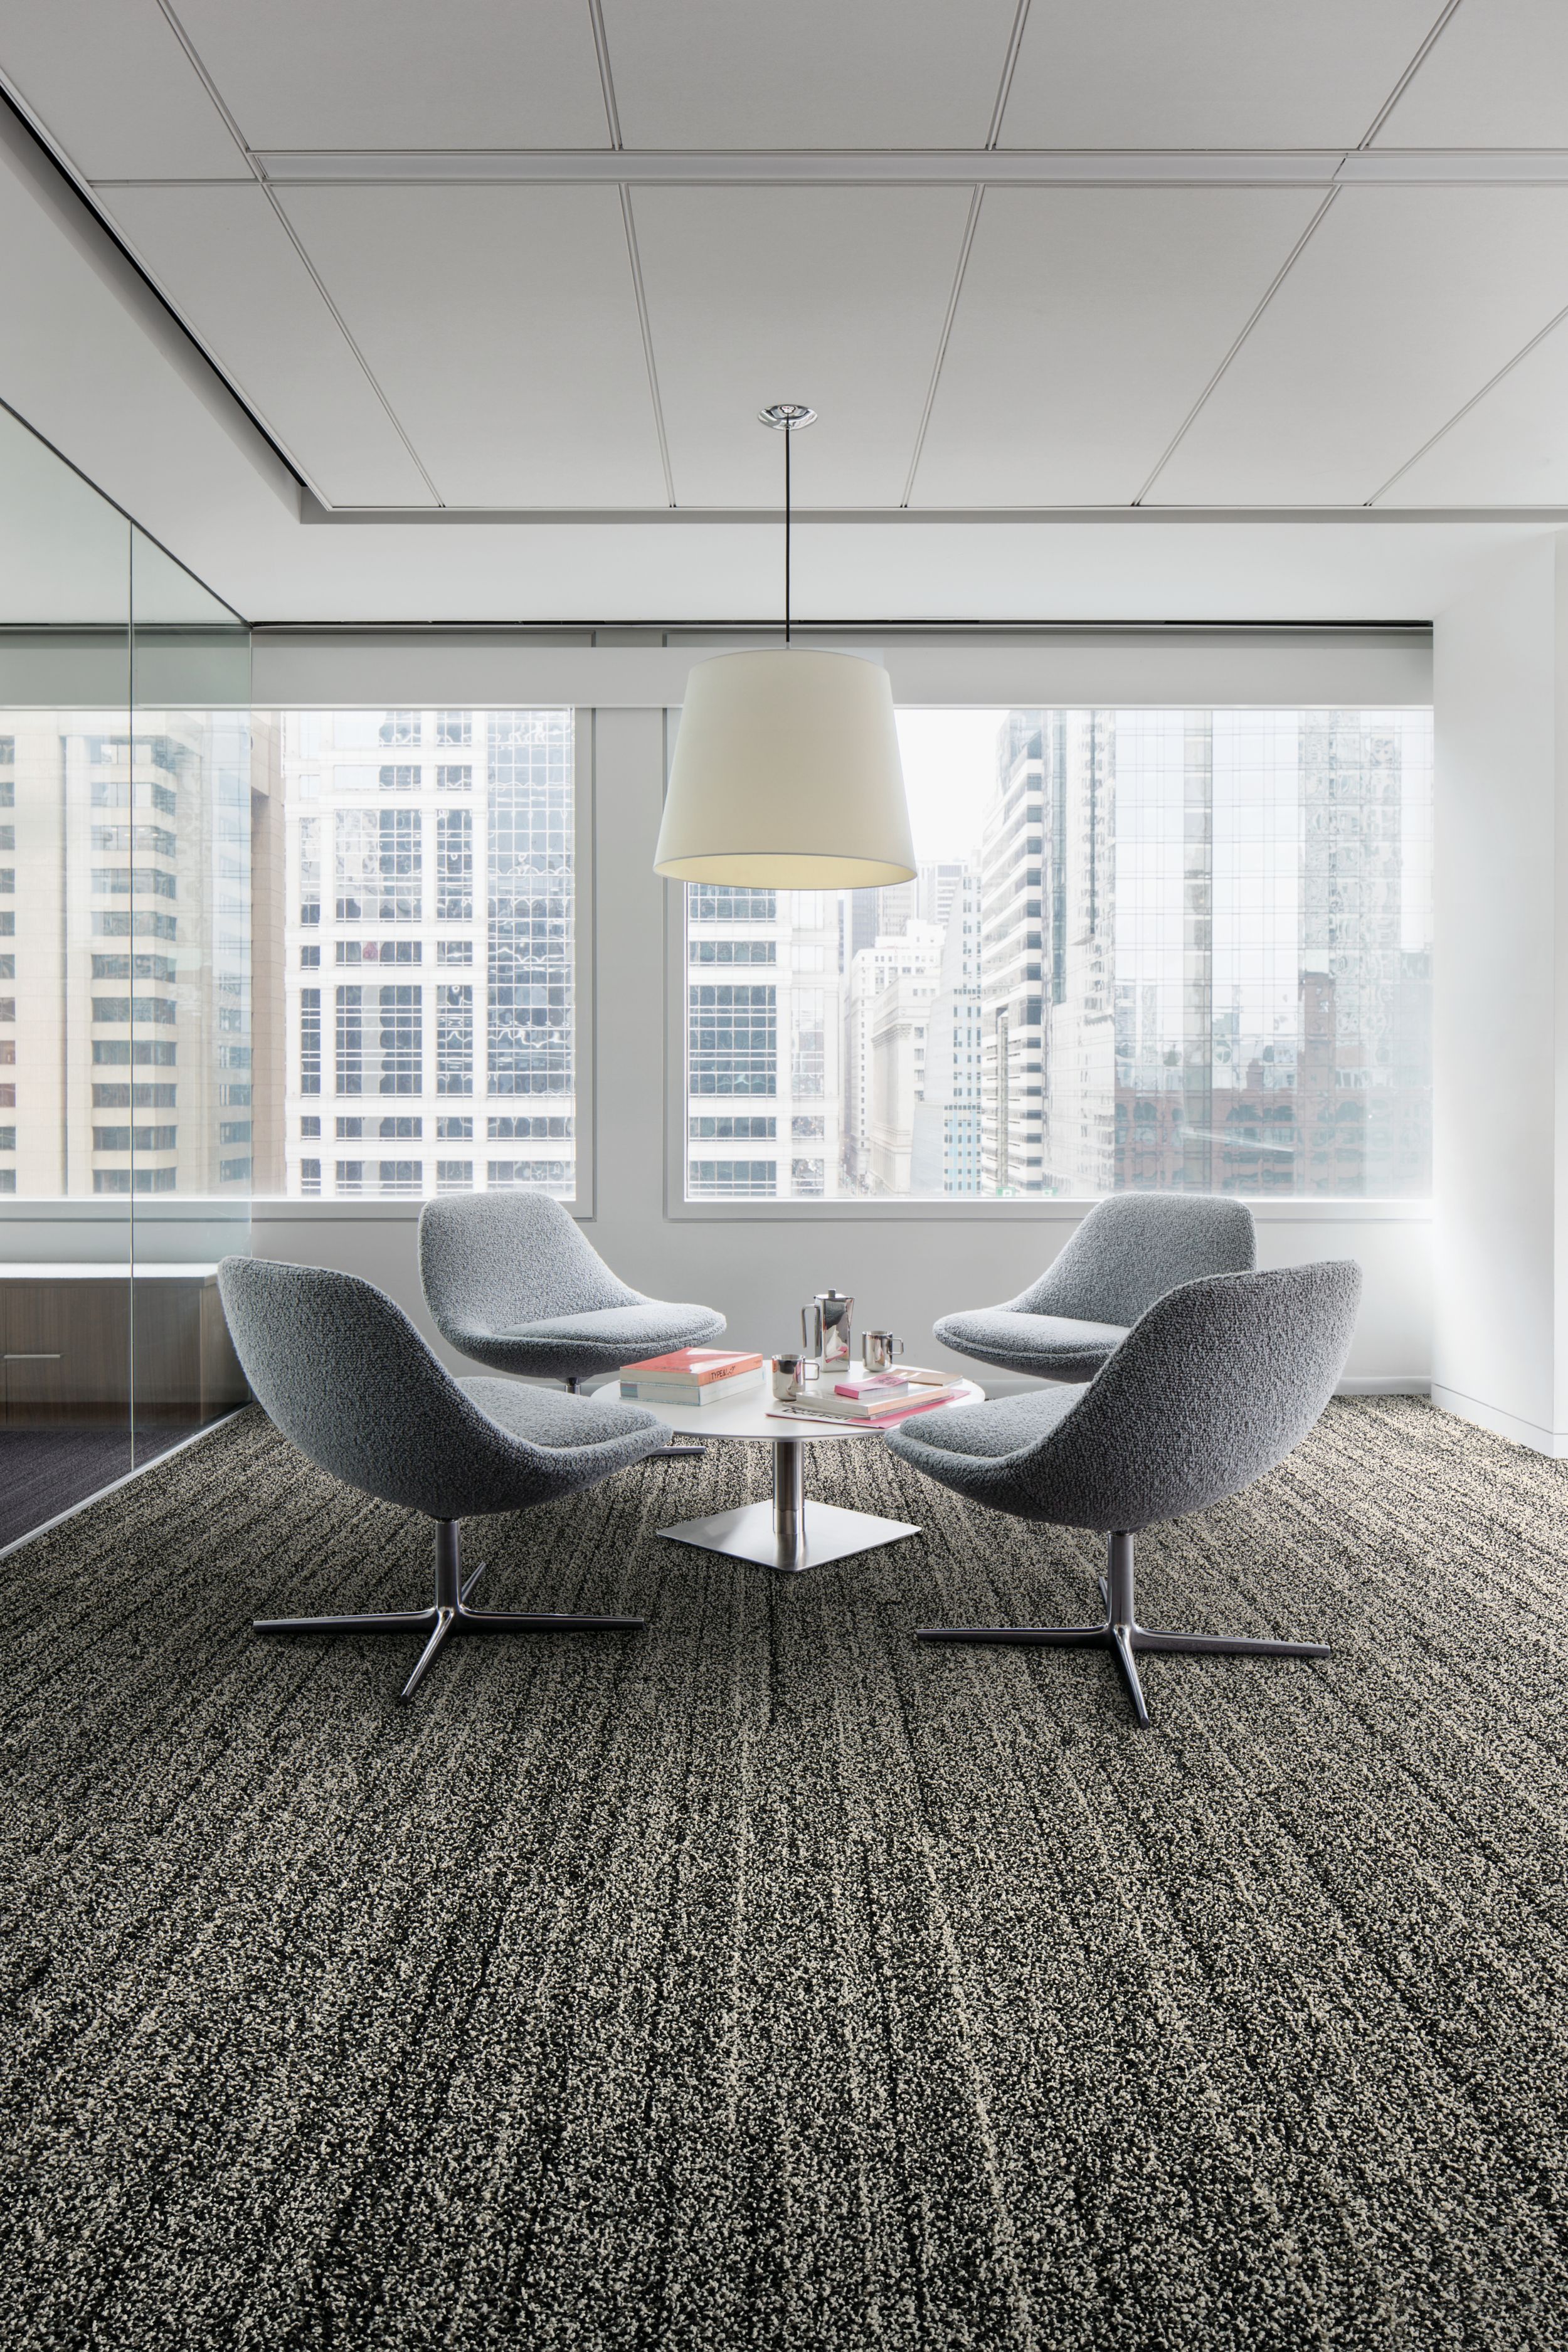 image Interface Overedge plank carpet tile with fabric chairs around round table numéro 2